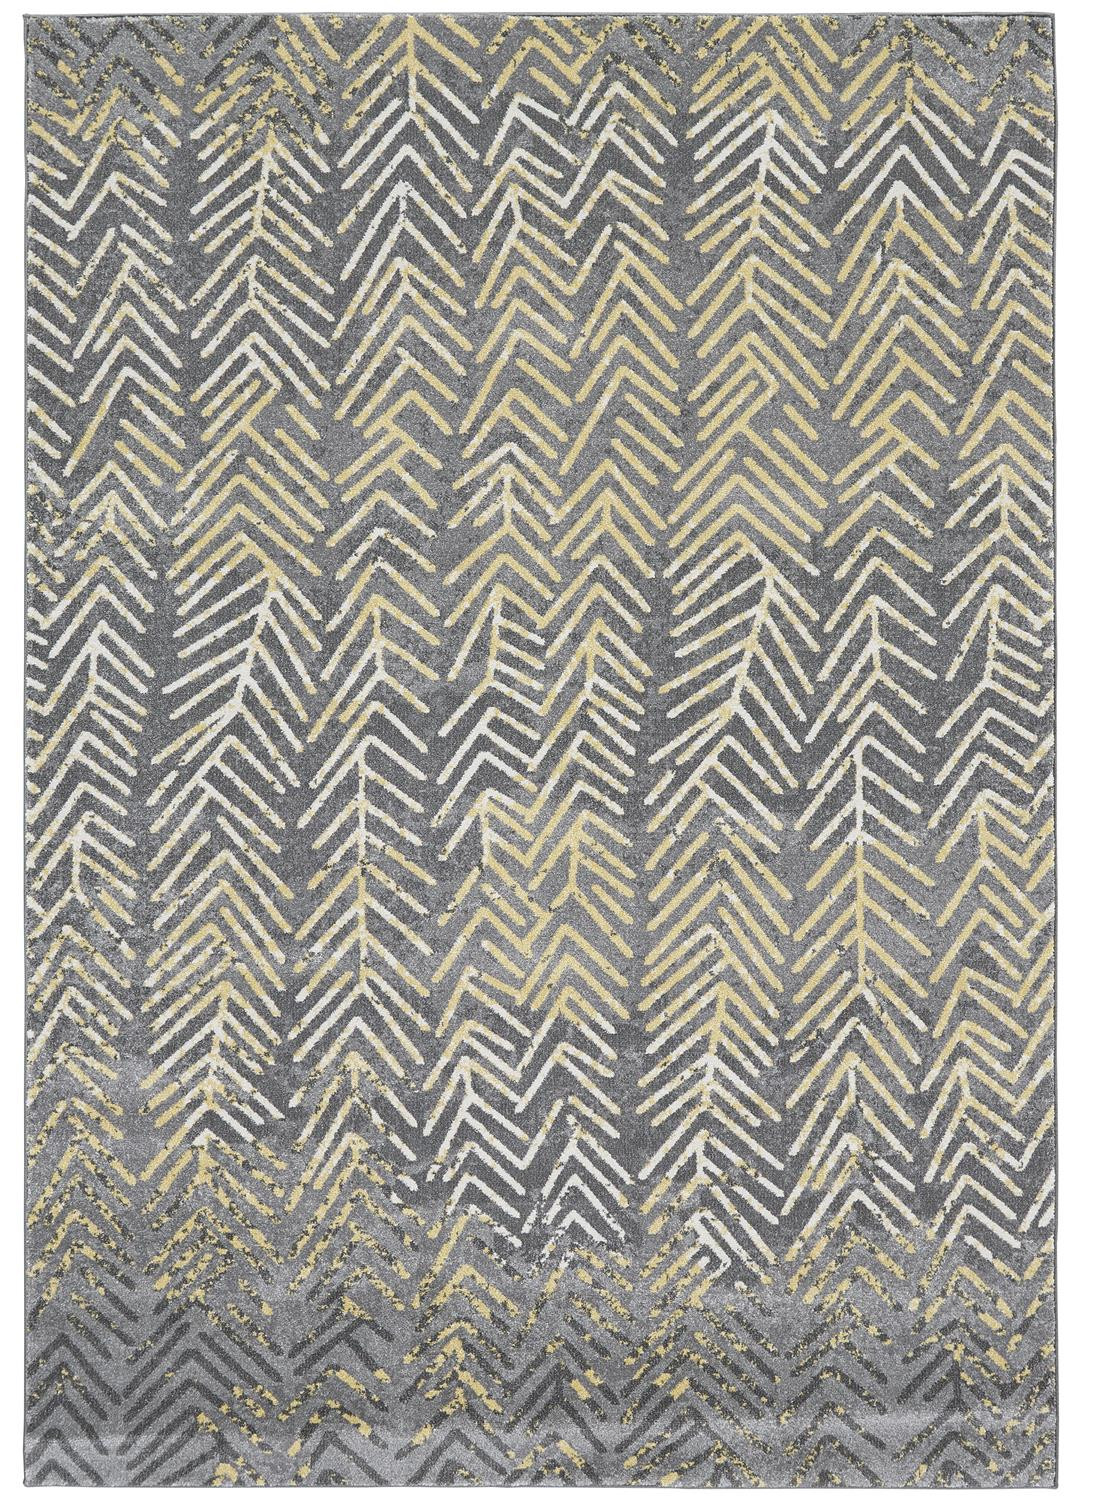 7' X 10' Gray Yellow And White Abstract Stain Resistant Area Rug-511167-1